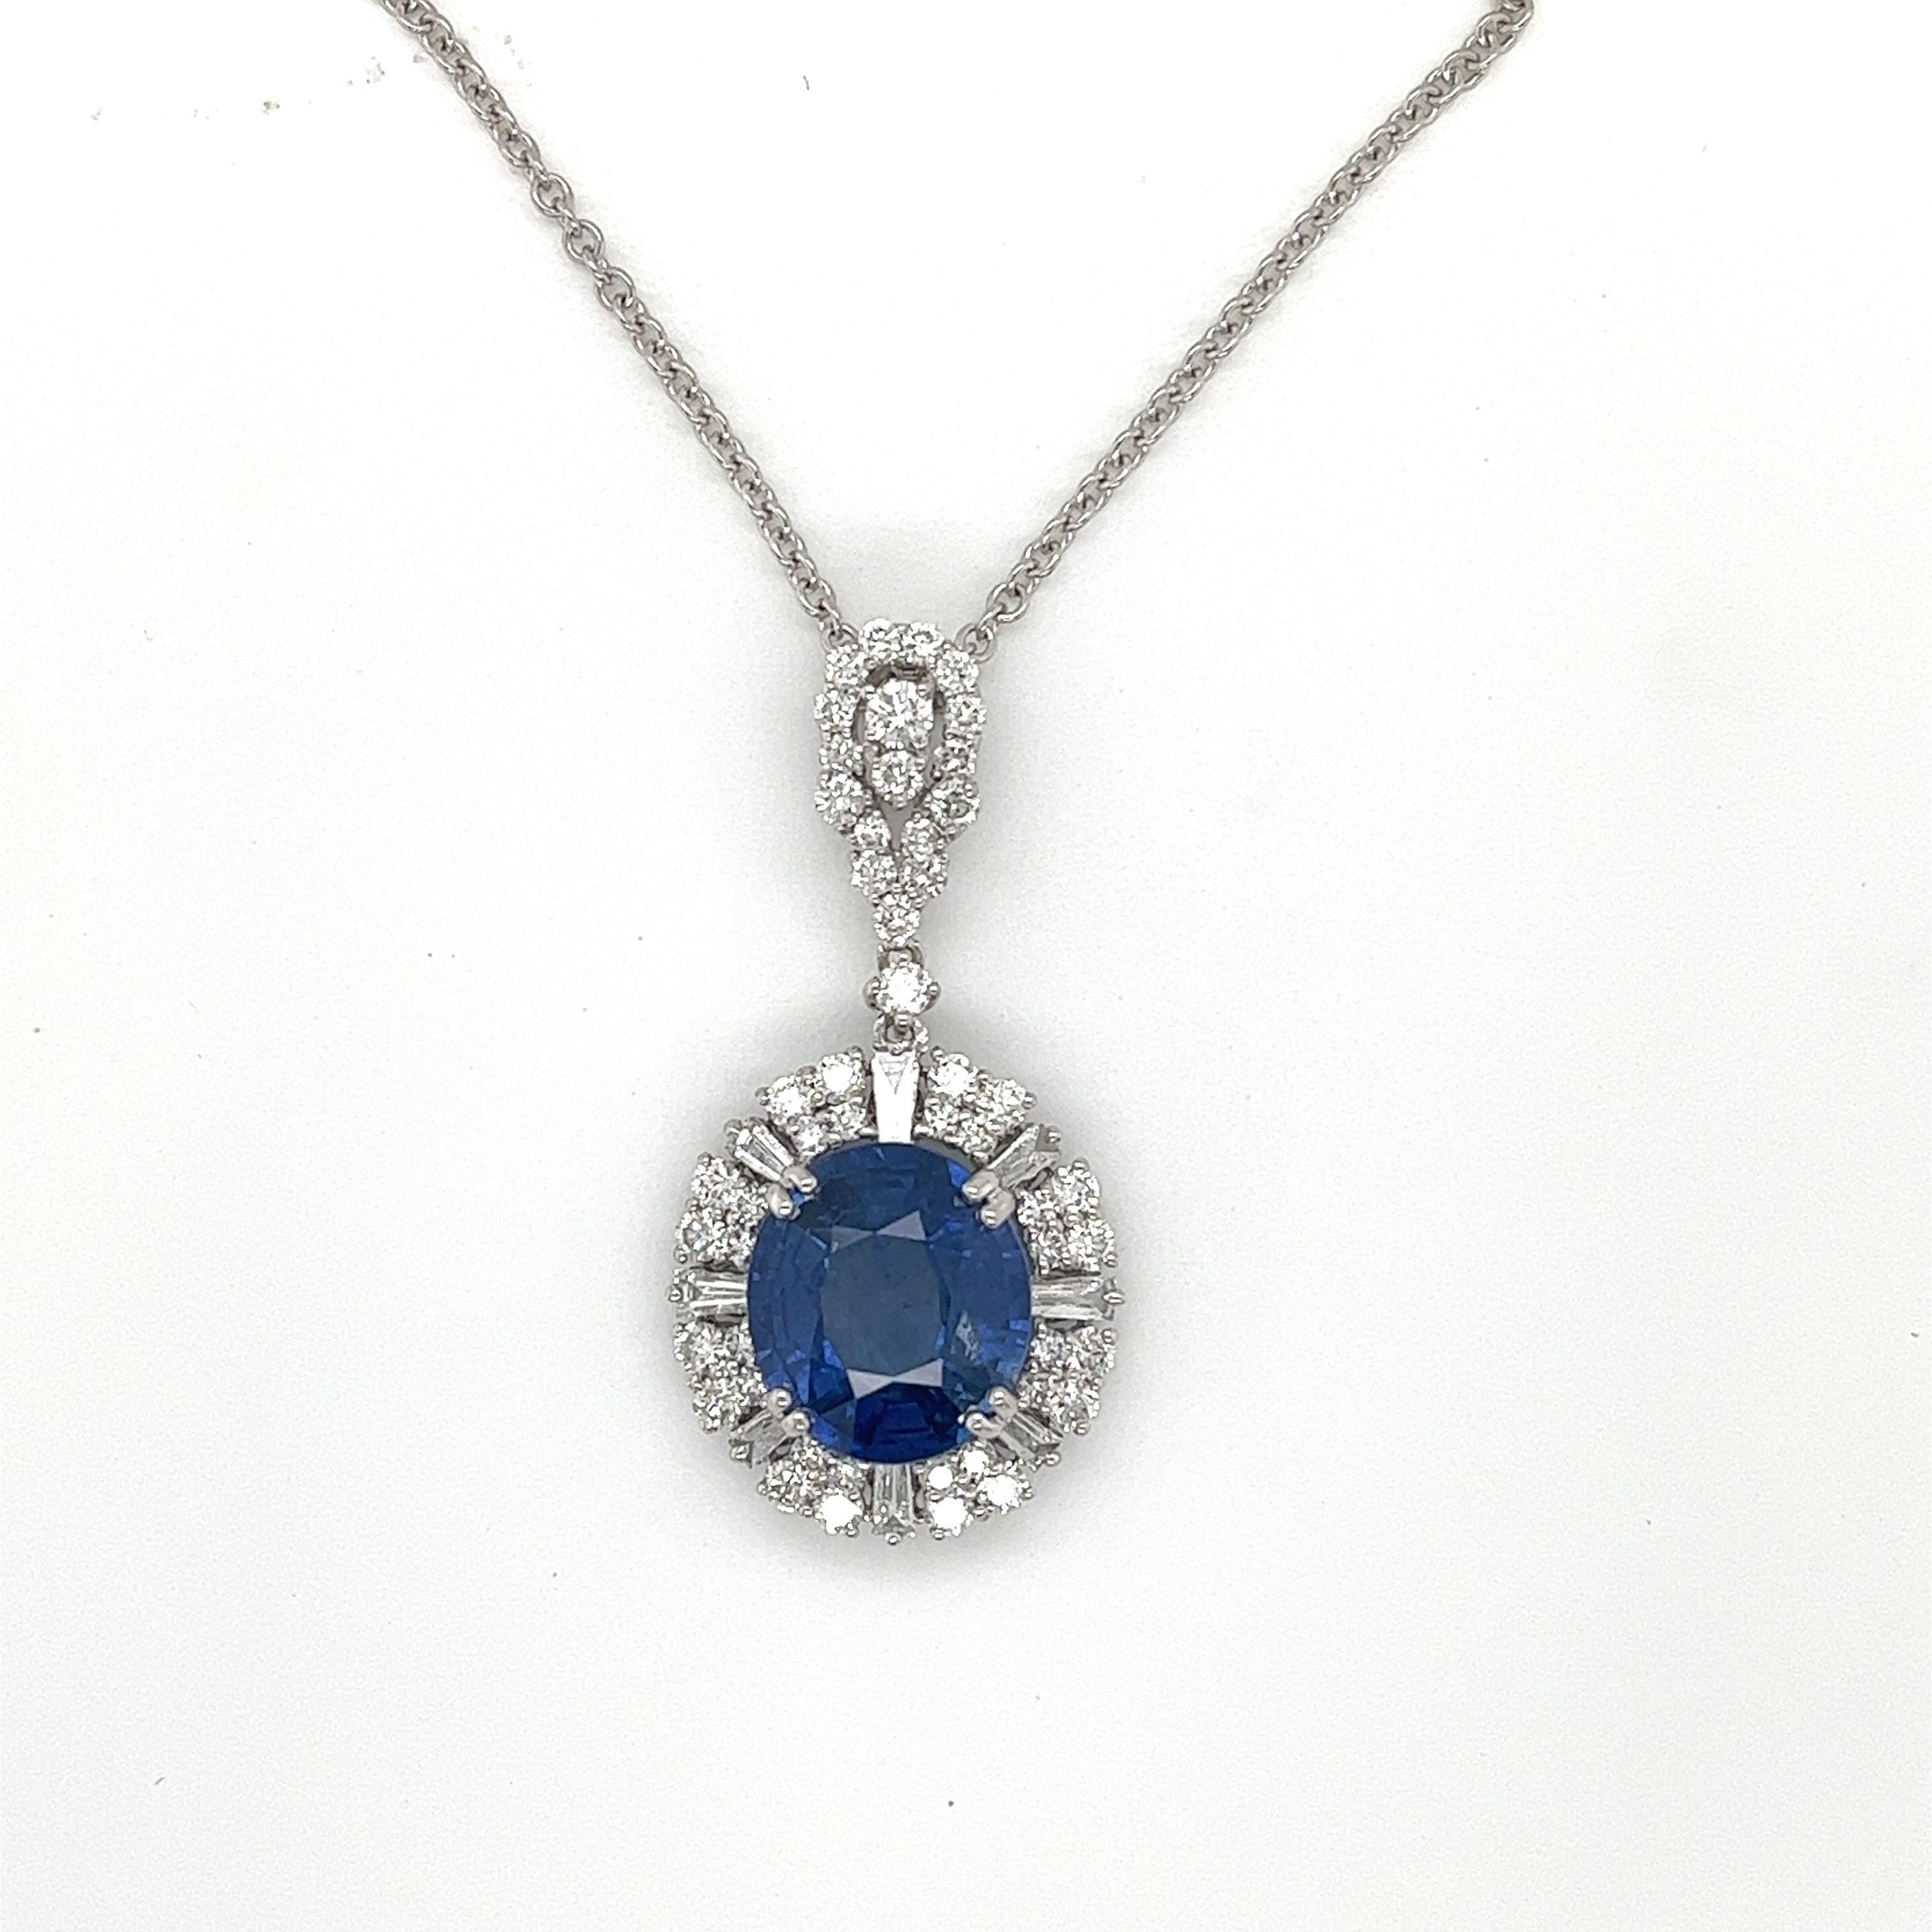 Oval Ceylon Sapphire weighing 5.48 cts
Measuring (11.60x10.30x5.58) mm
50 round diamonds weighing 1.11 cts
8 baguette diamonds weighing .25 cts
H SI1
Set in 18k white gold pendant
3.09 g
White gold chain is adjustable 16-18 inches
